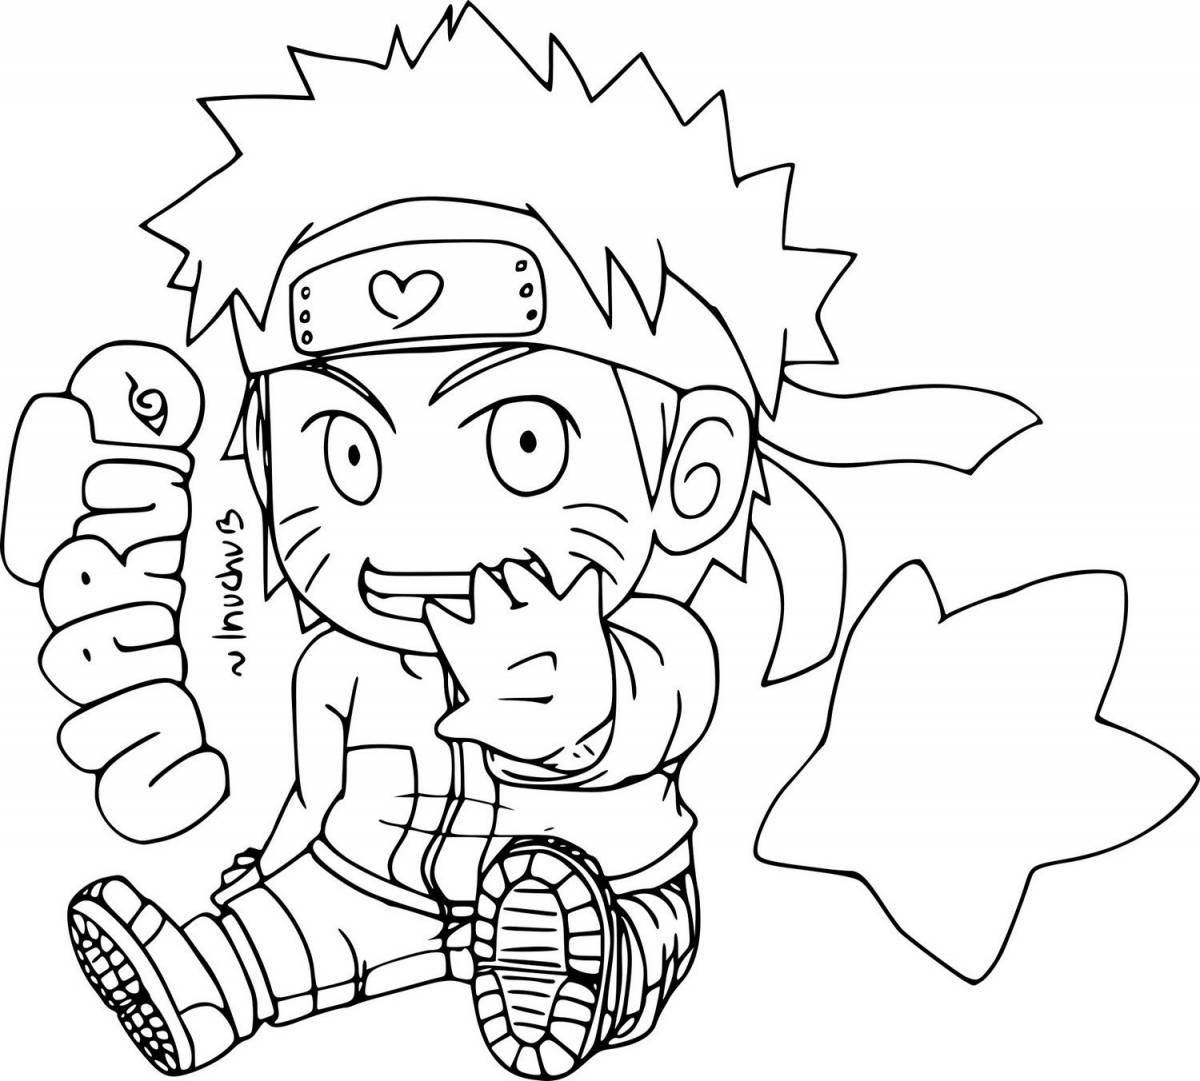 Amazing naruto coloring pages for girls